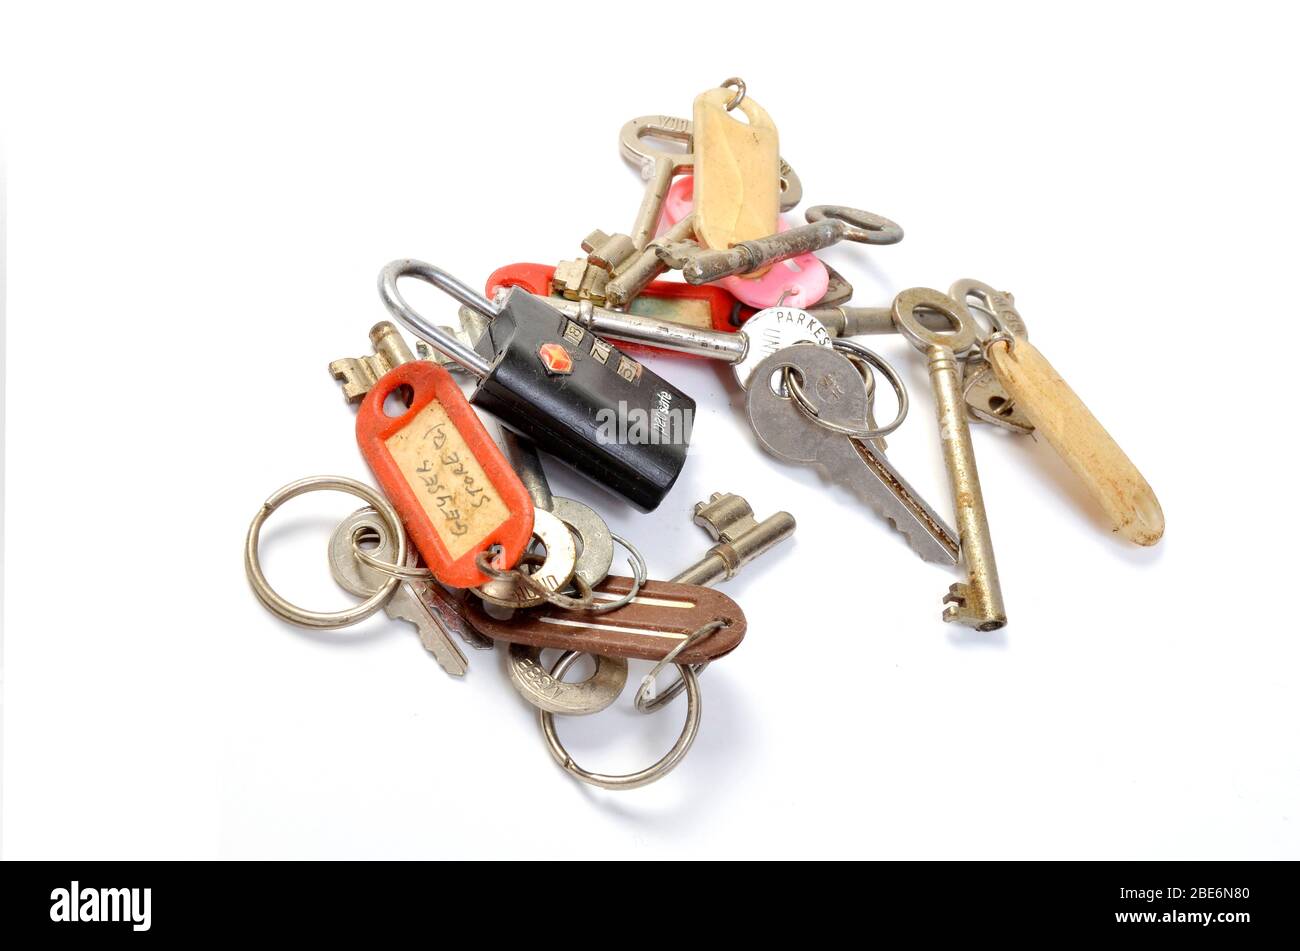 collection of old household keys Stock Photo